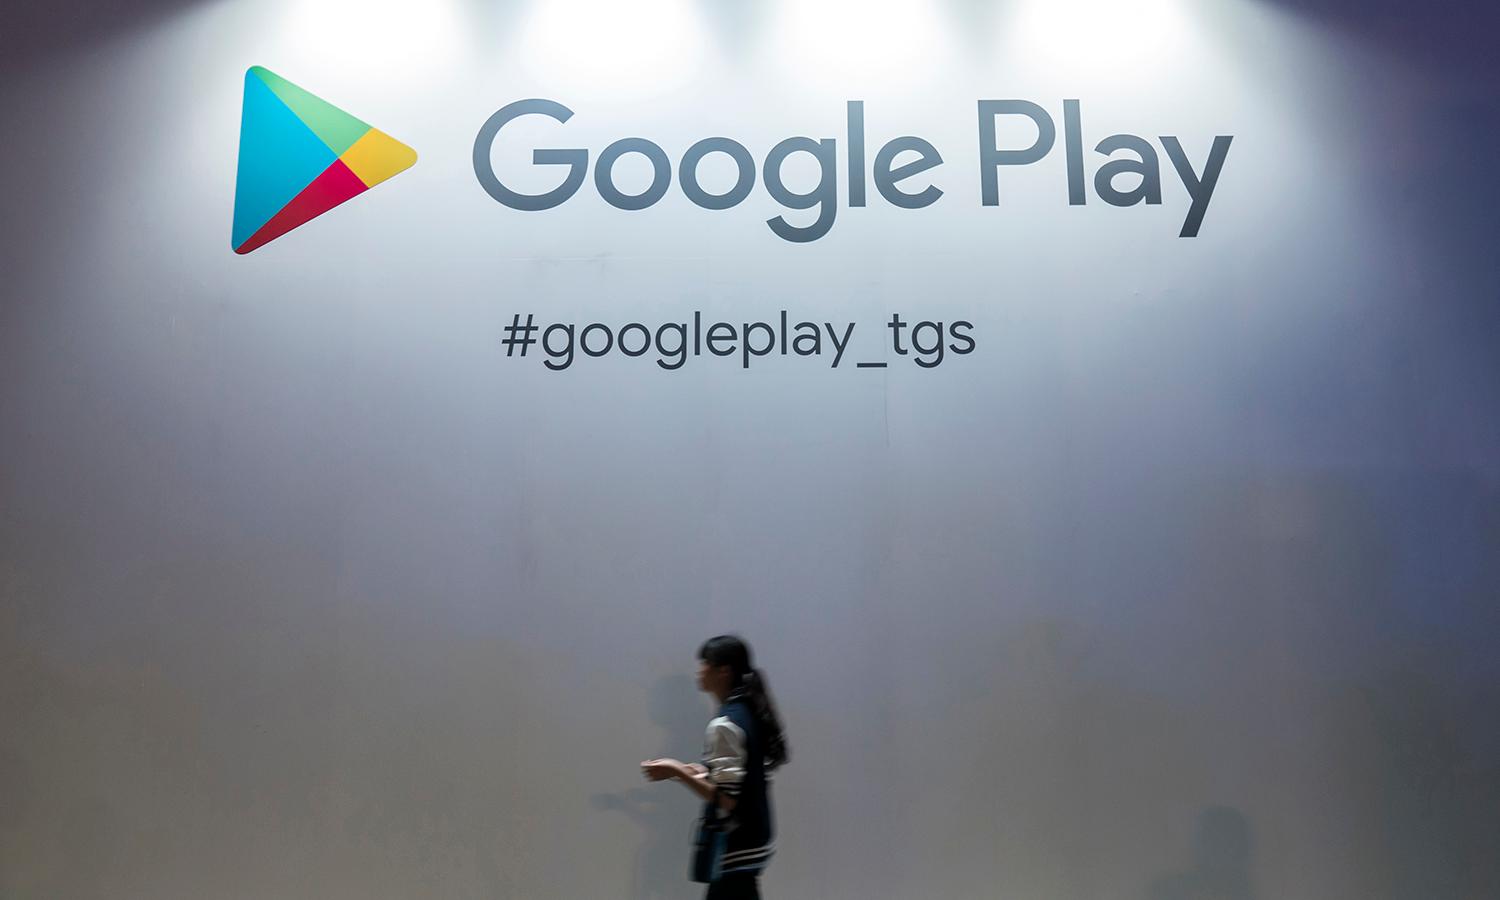 An attendee walks past the Google Play booth at the Tokyo Game Show 2019 at Makuhari Messe on Sept. 12, 2019, in Chiba, Japan. (Photo by Tomohiro Ohsumi/Getty Images)